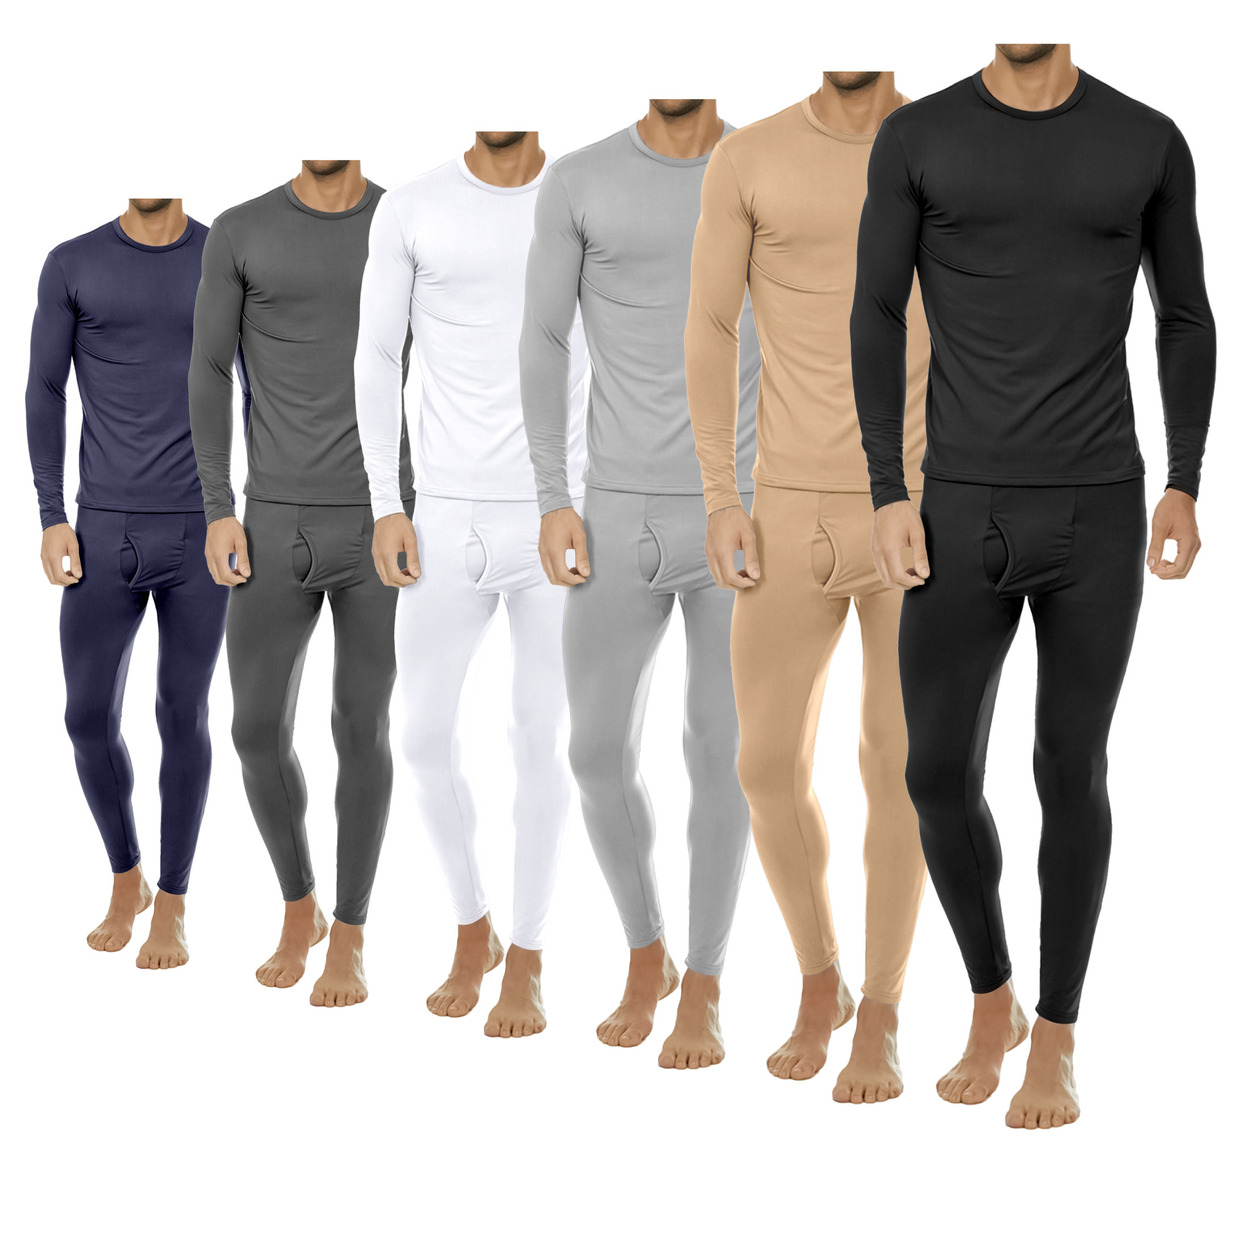 2-Pieces: Men's Winter Warm Fleece Lined Thermal Underwear Set For Cold Weather - White, X-large